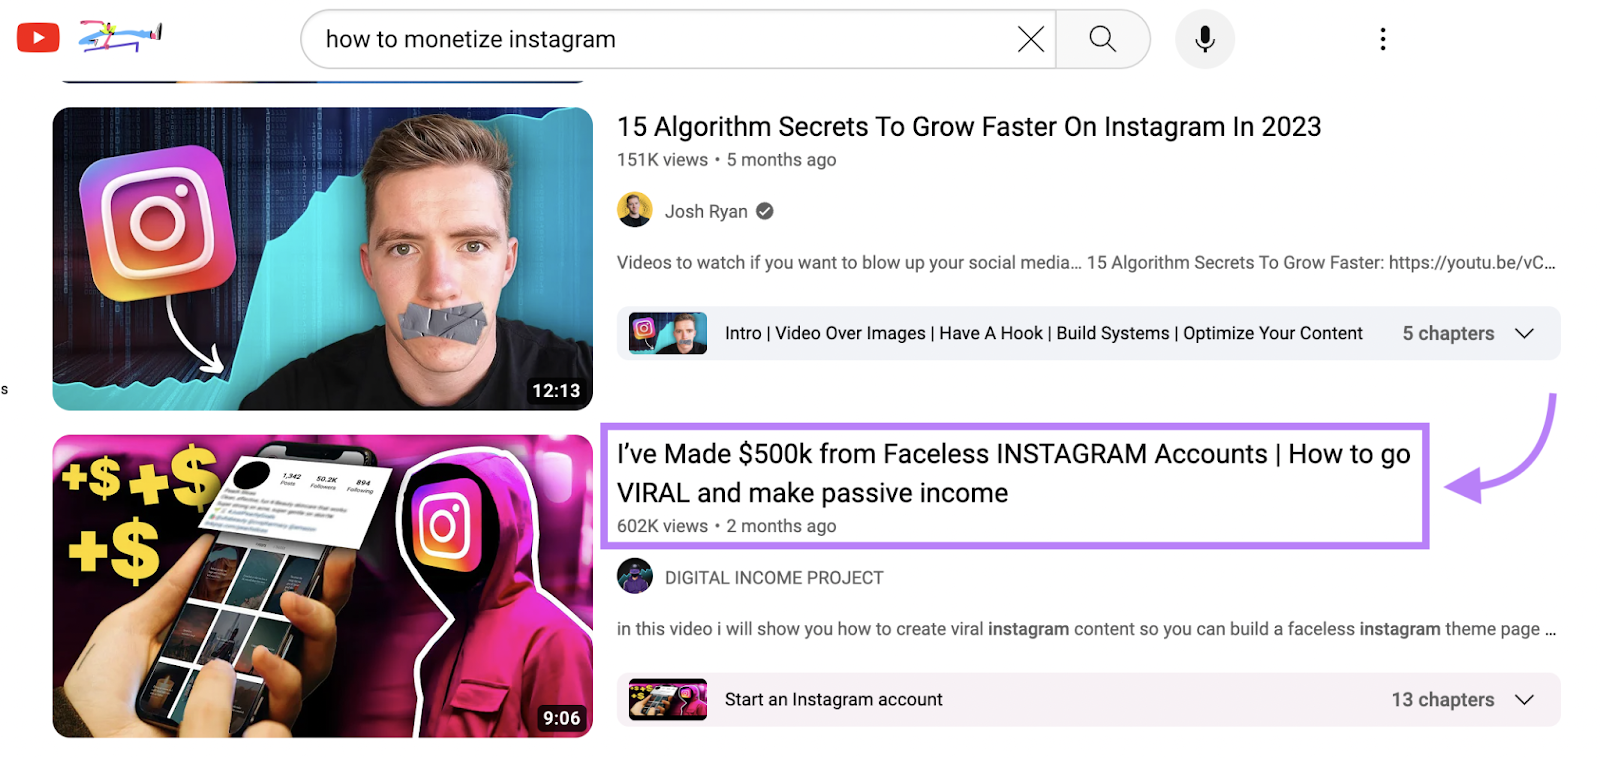 YouTube video titled "“I’ve Made 0k from Faceless INSTAGRAM Accounts | How to go VIRAL and make passive income”